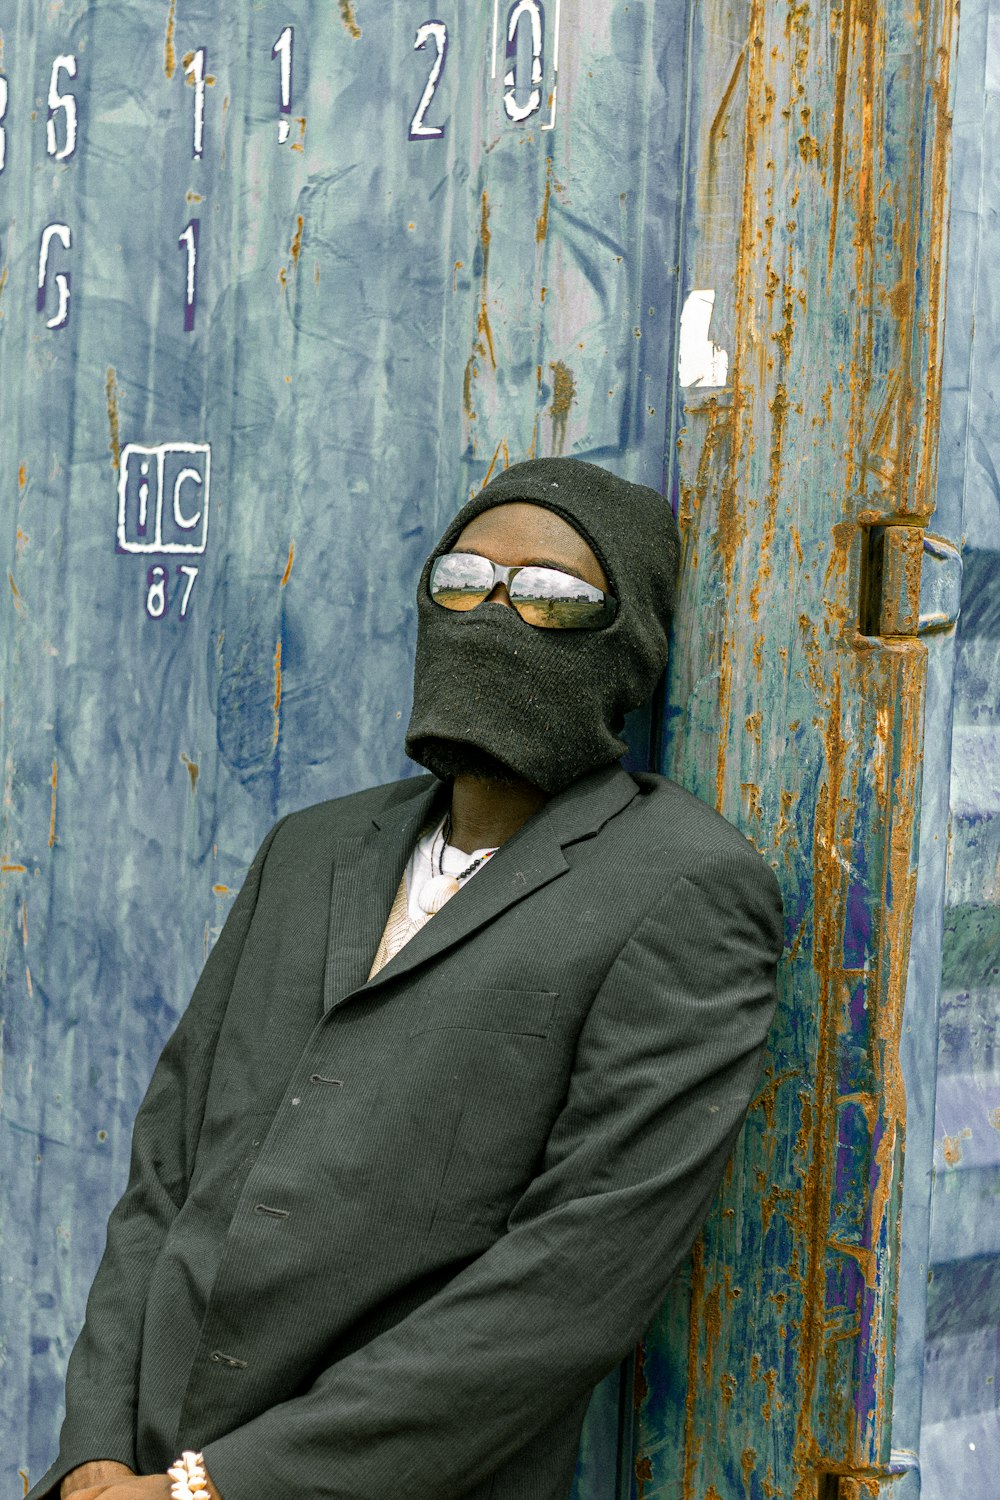 a man in a suit and mask leaning against a wall